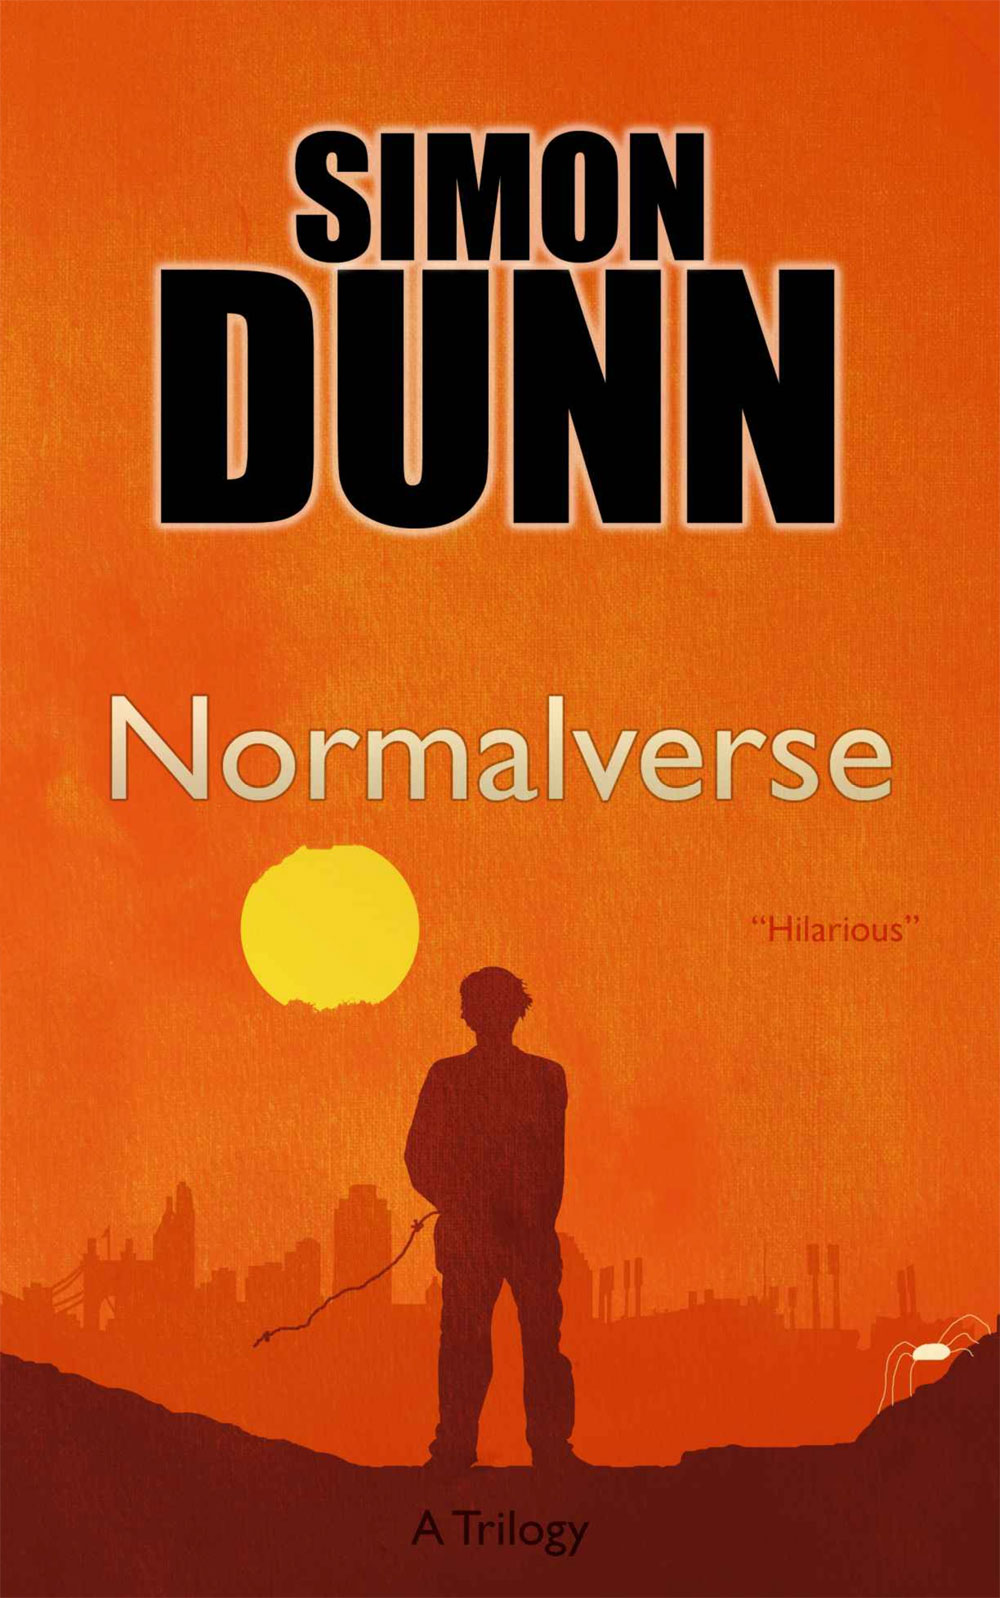 Normalverse is a Free Kindle Book with meh Reviews